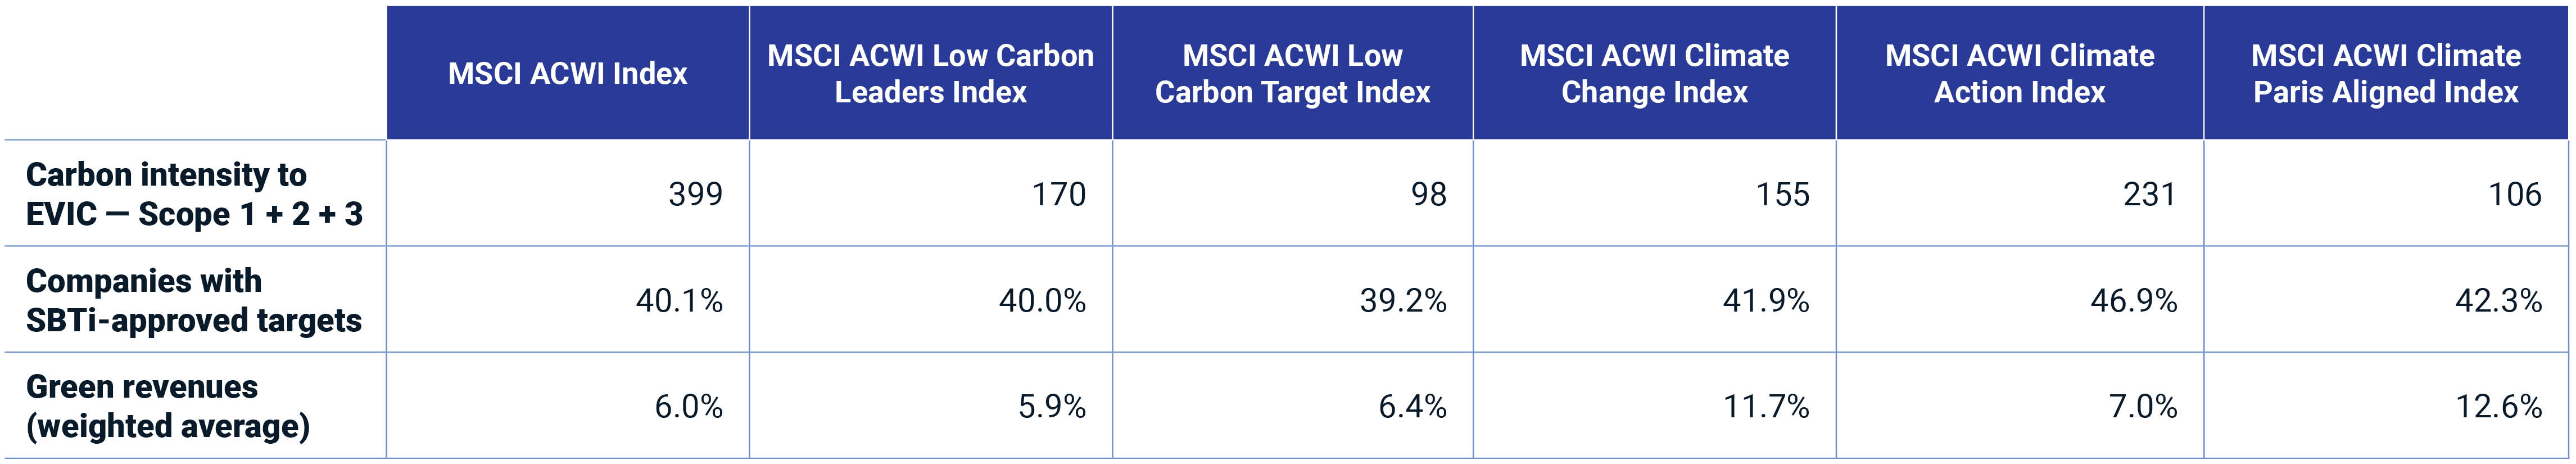 Comparison of selected climate metrics